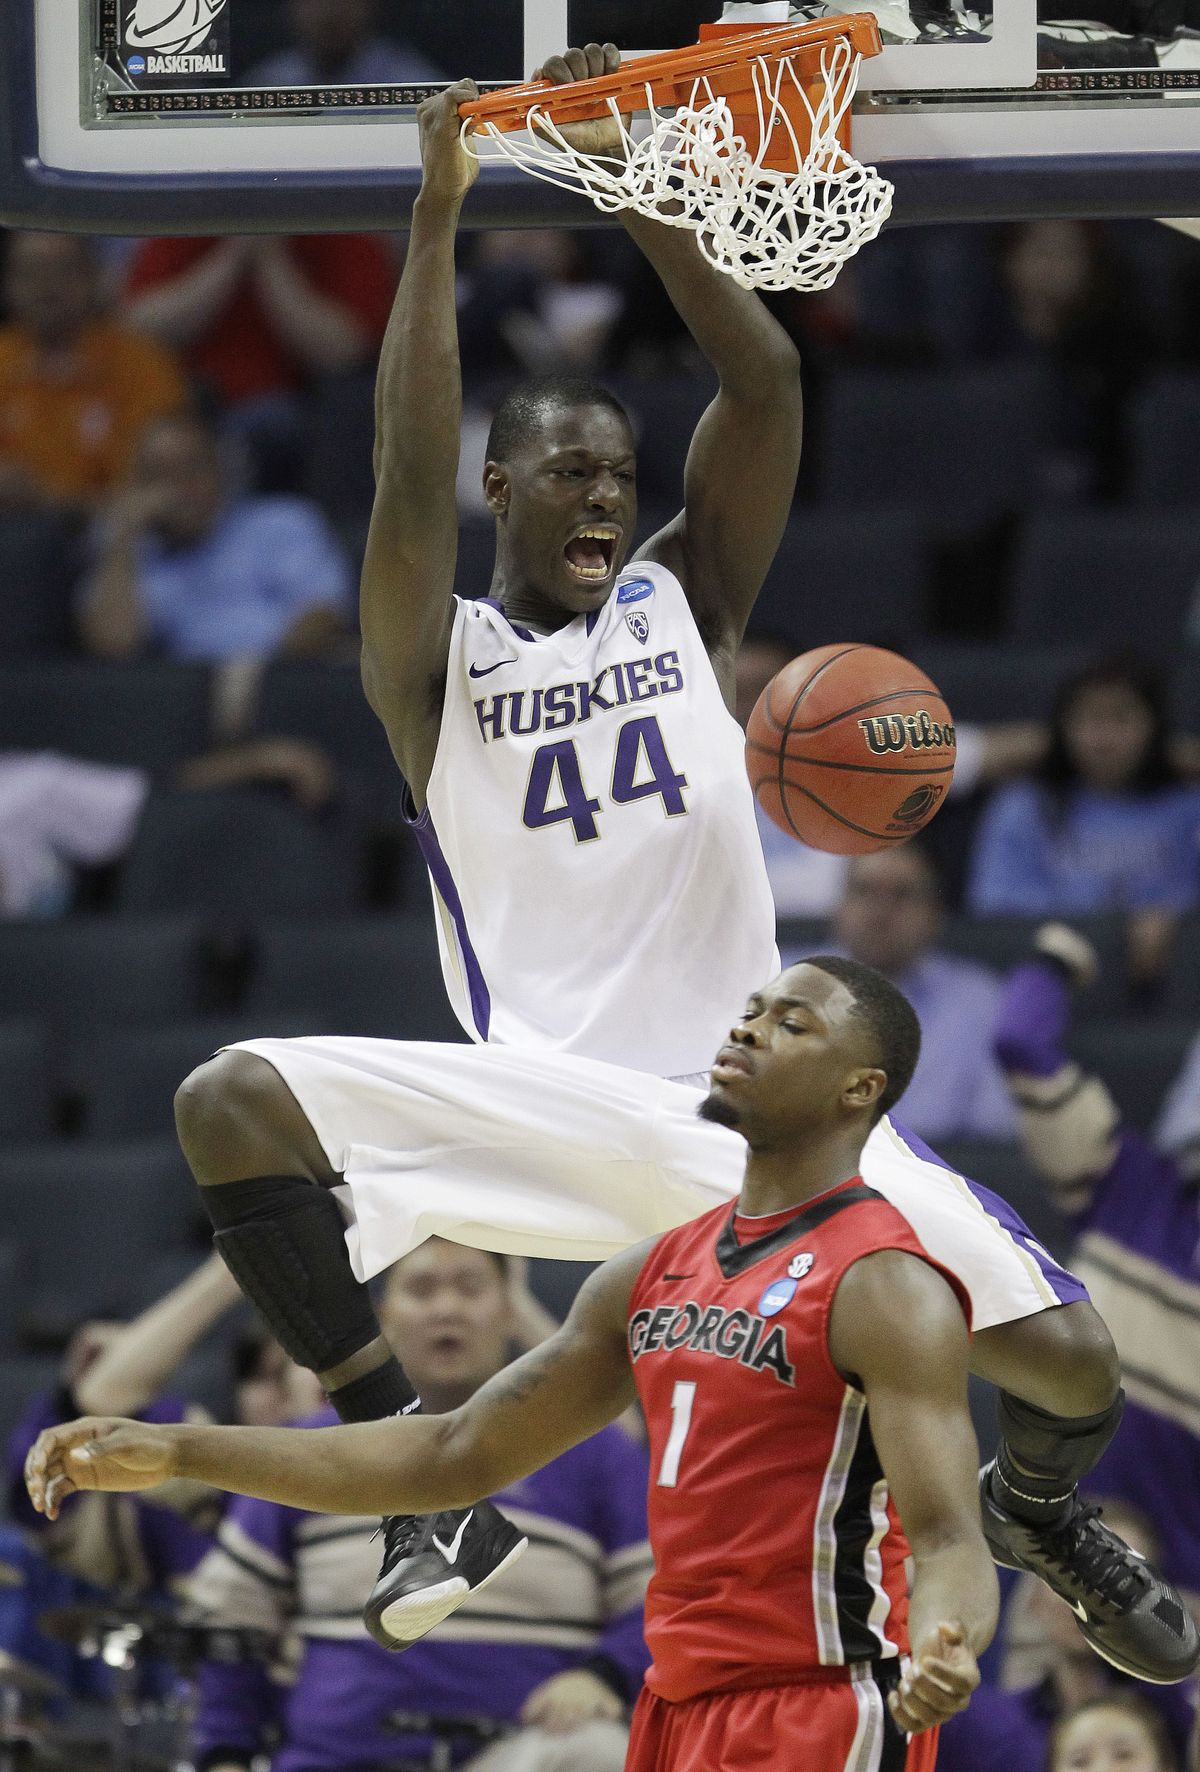 The Huskies are hoping that 6-foot-8 Darnell Gant finds a way to operate inside against North Carolina. (Associated Press)